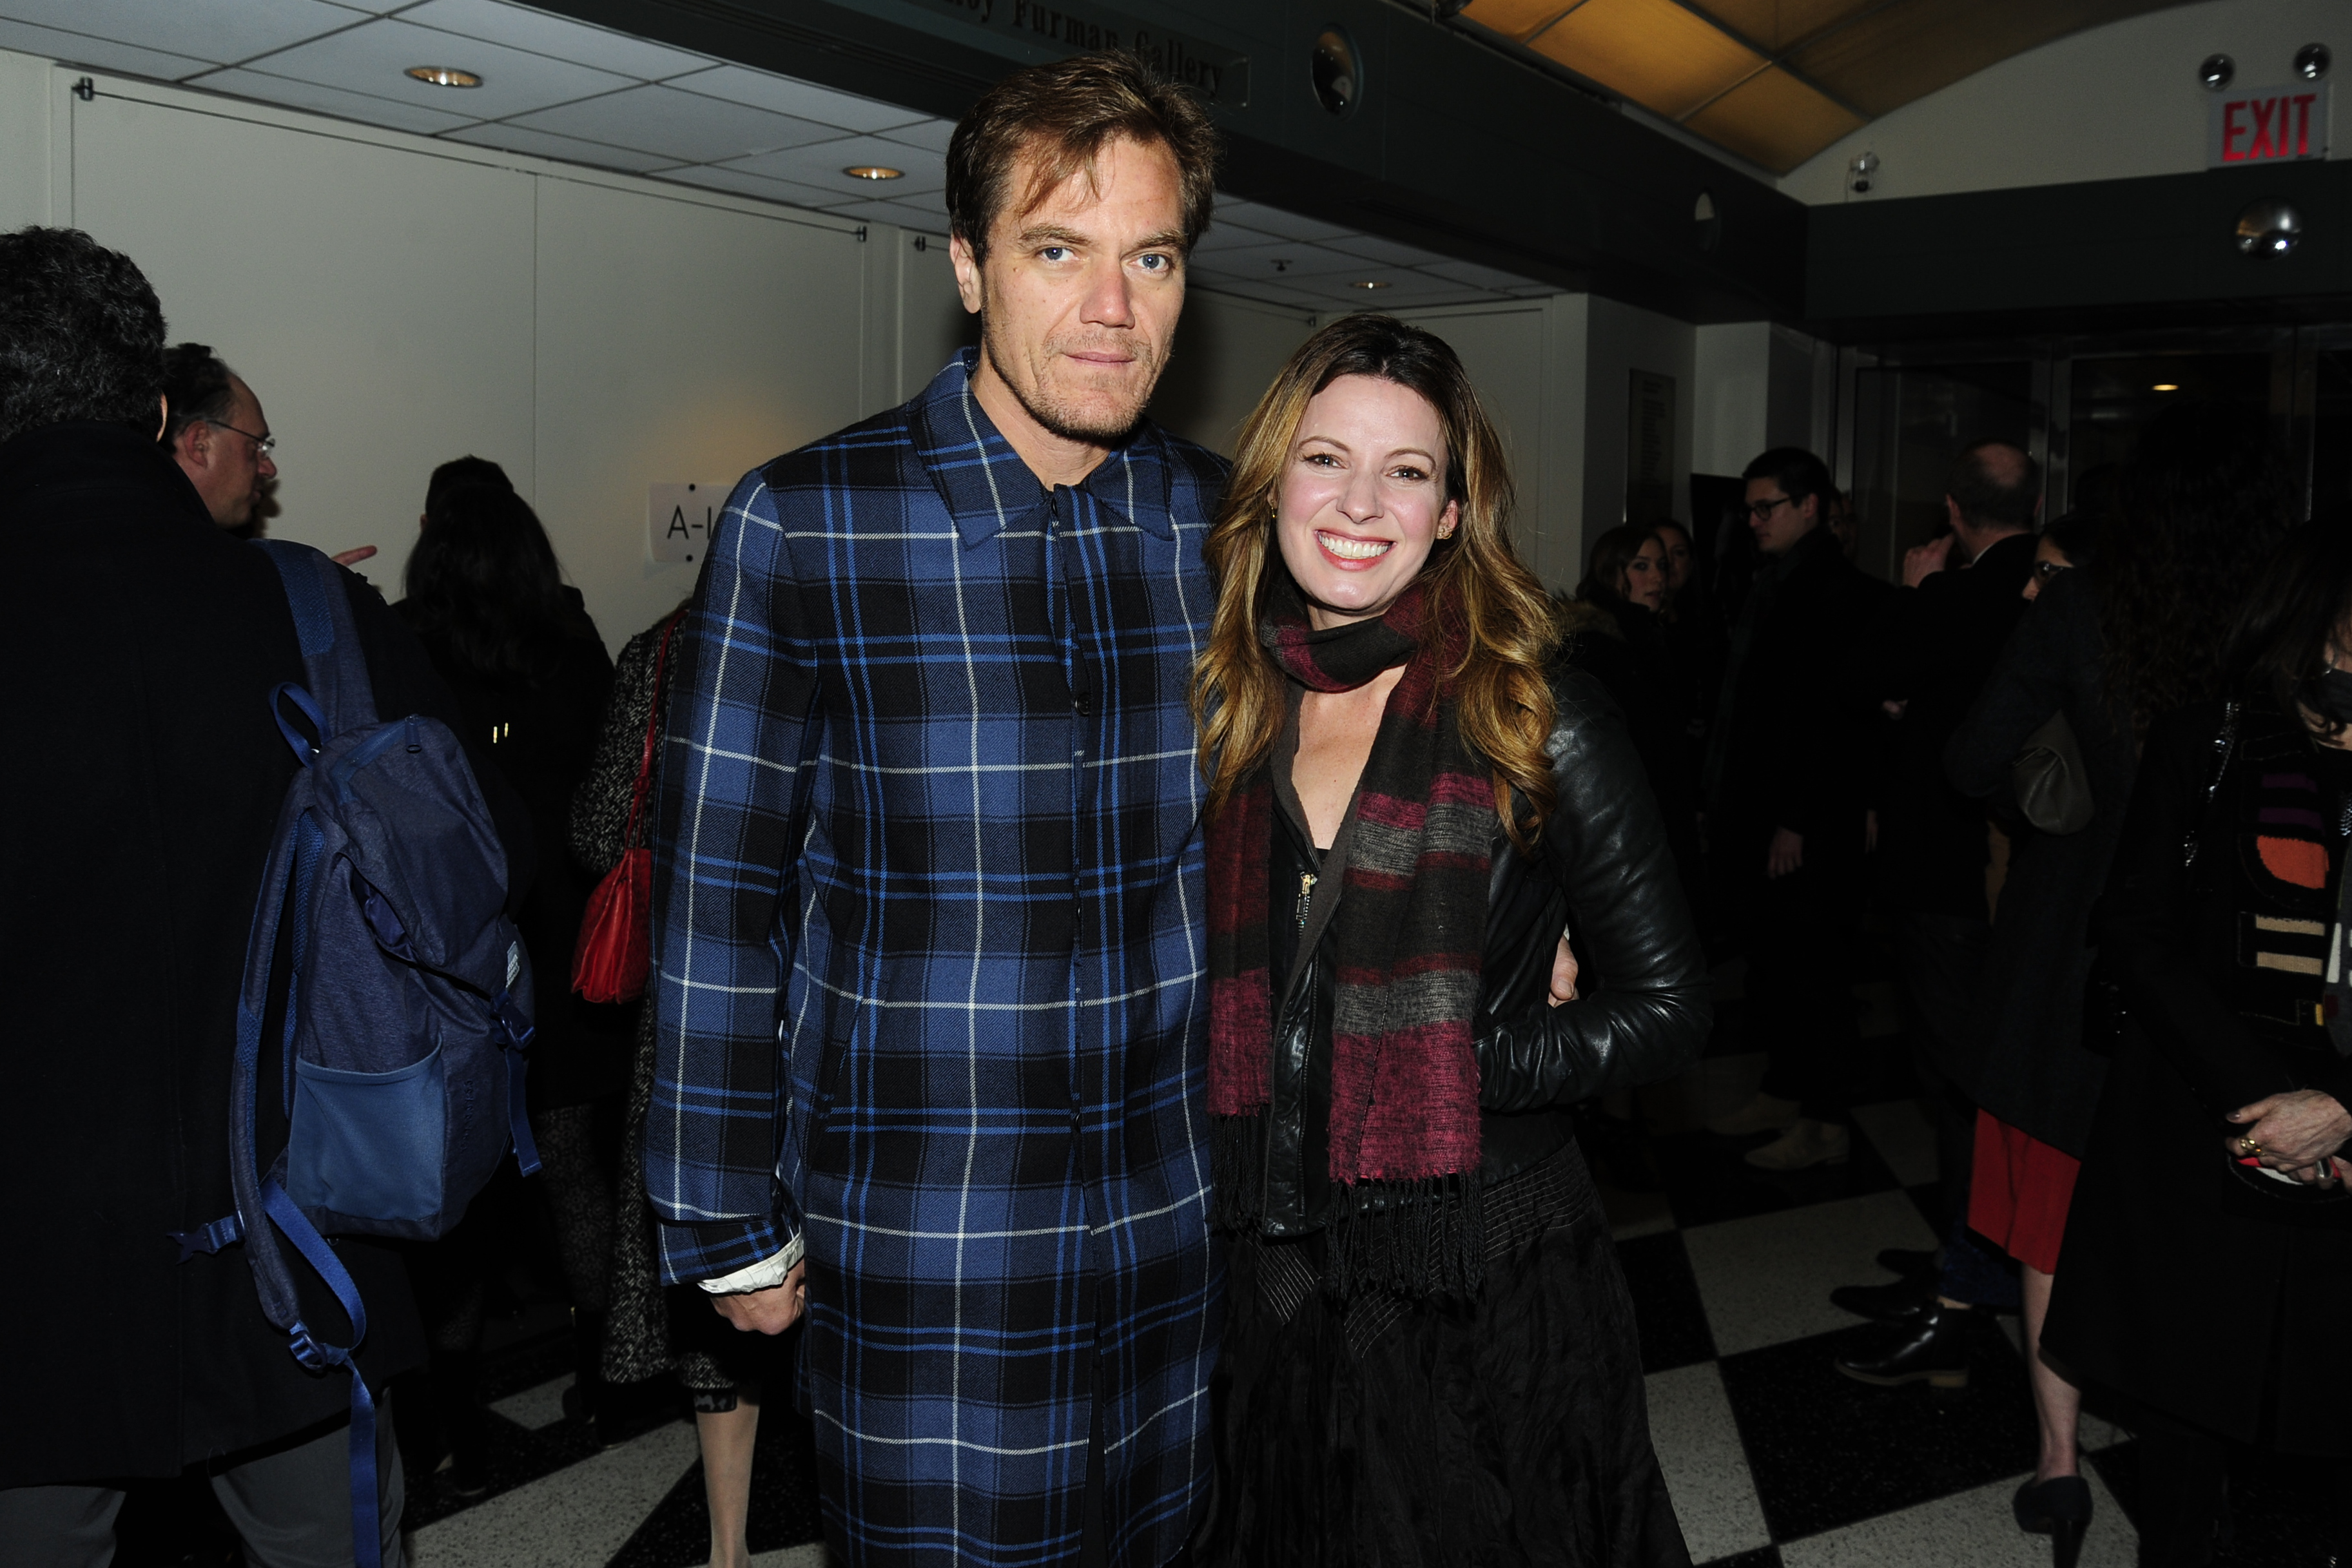 Michael Shannon and Kate Arrington at the New York premiere of "Phantom Thread" on December 11, 2017, in New York City | Source: Getty Images